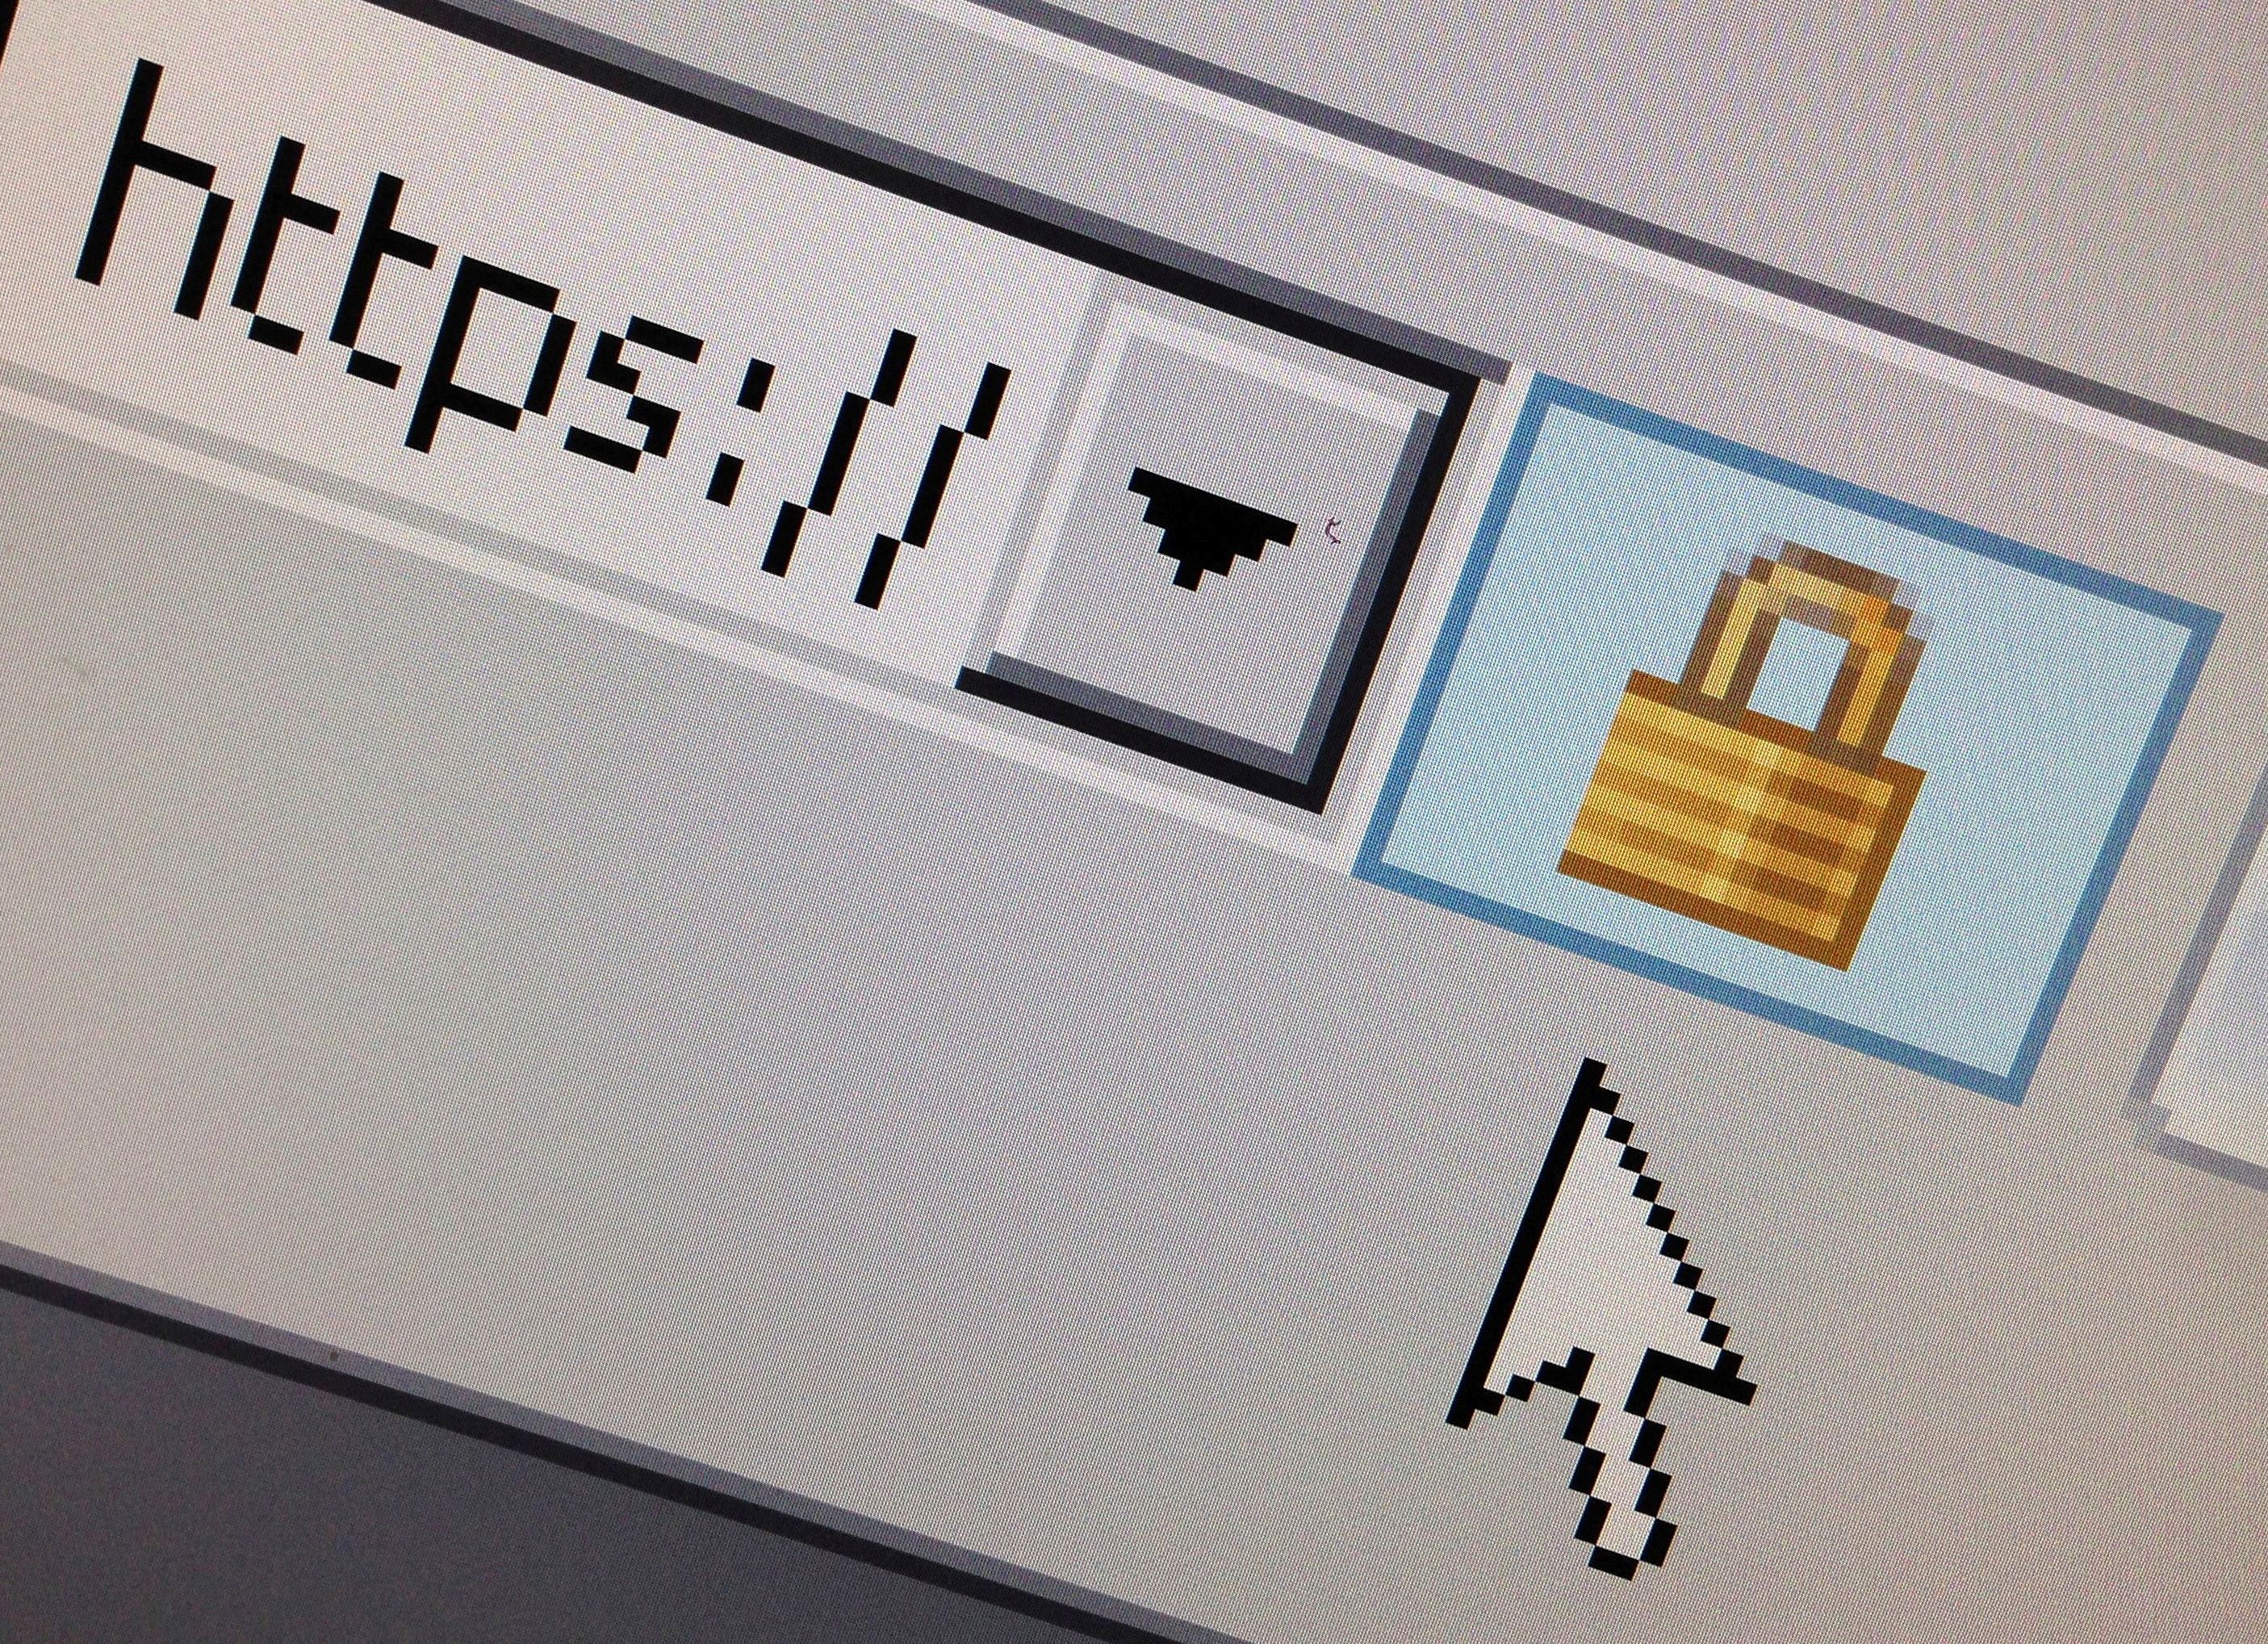 A lock icon, signifying an encrypted Internet connection, is seen on an Internet Explorer browser in Paris, France